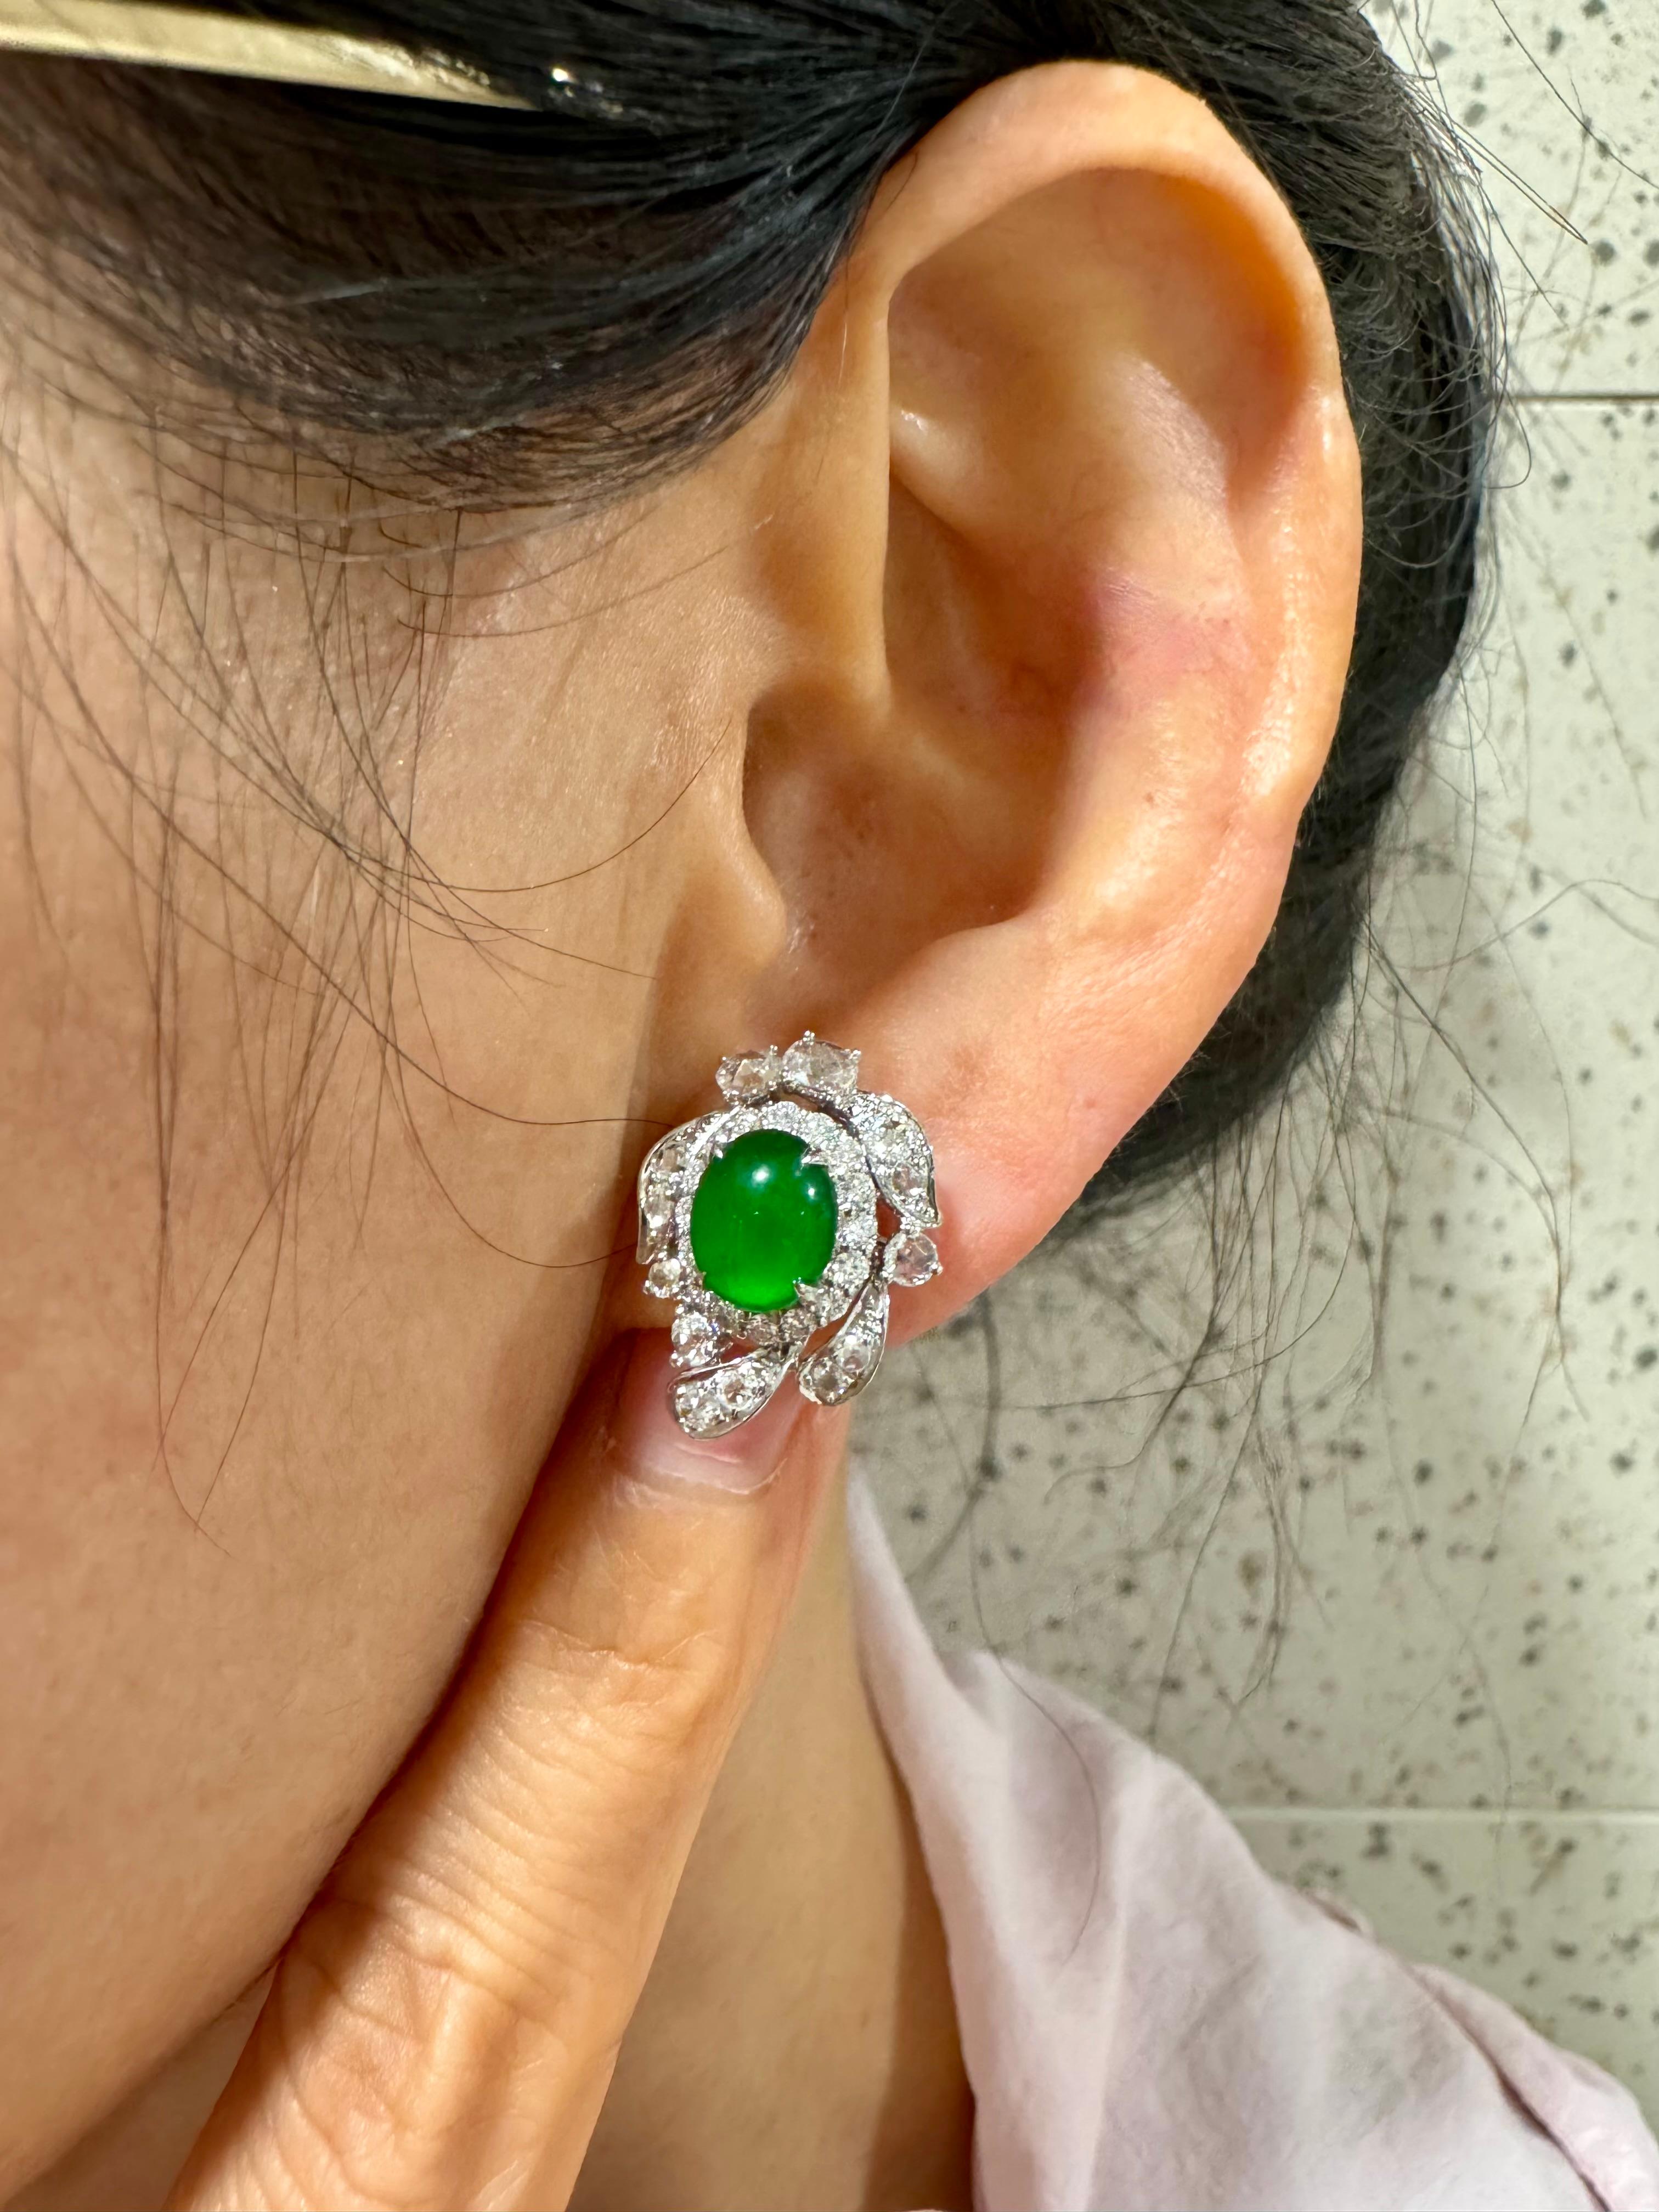 Please check out the HD video! It doesn't get much better than this! Here is a nice pair of true imperial green Jadeite Jade earrings. It has the best of the best glowing green color. The earrings are about 19.7mm x 15.3mm each in outer diameter.